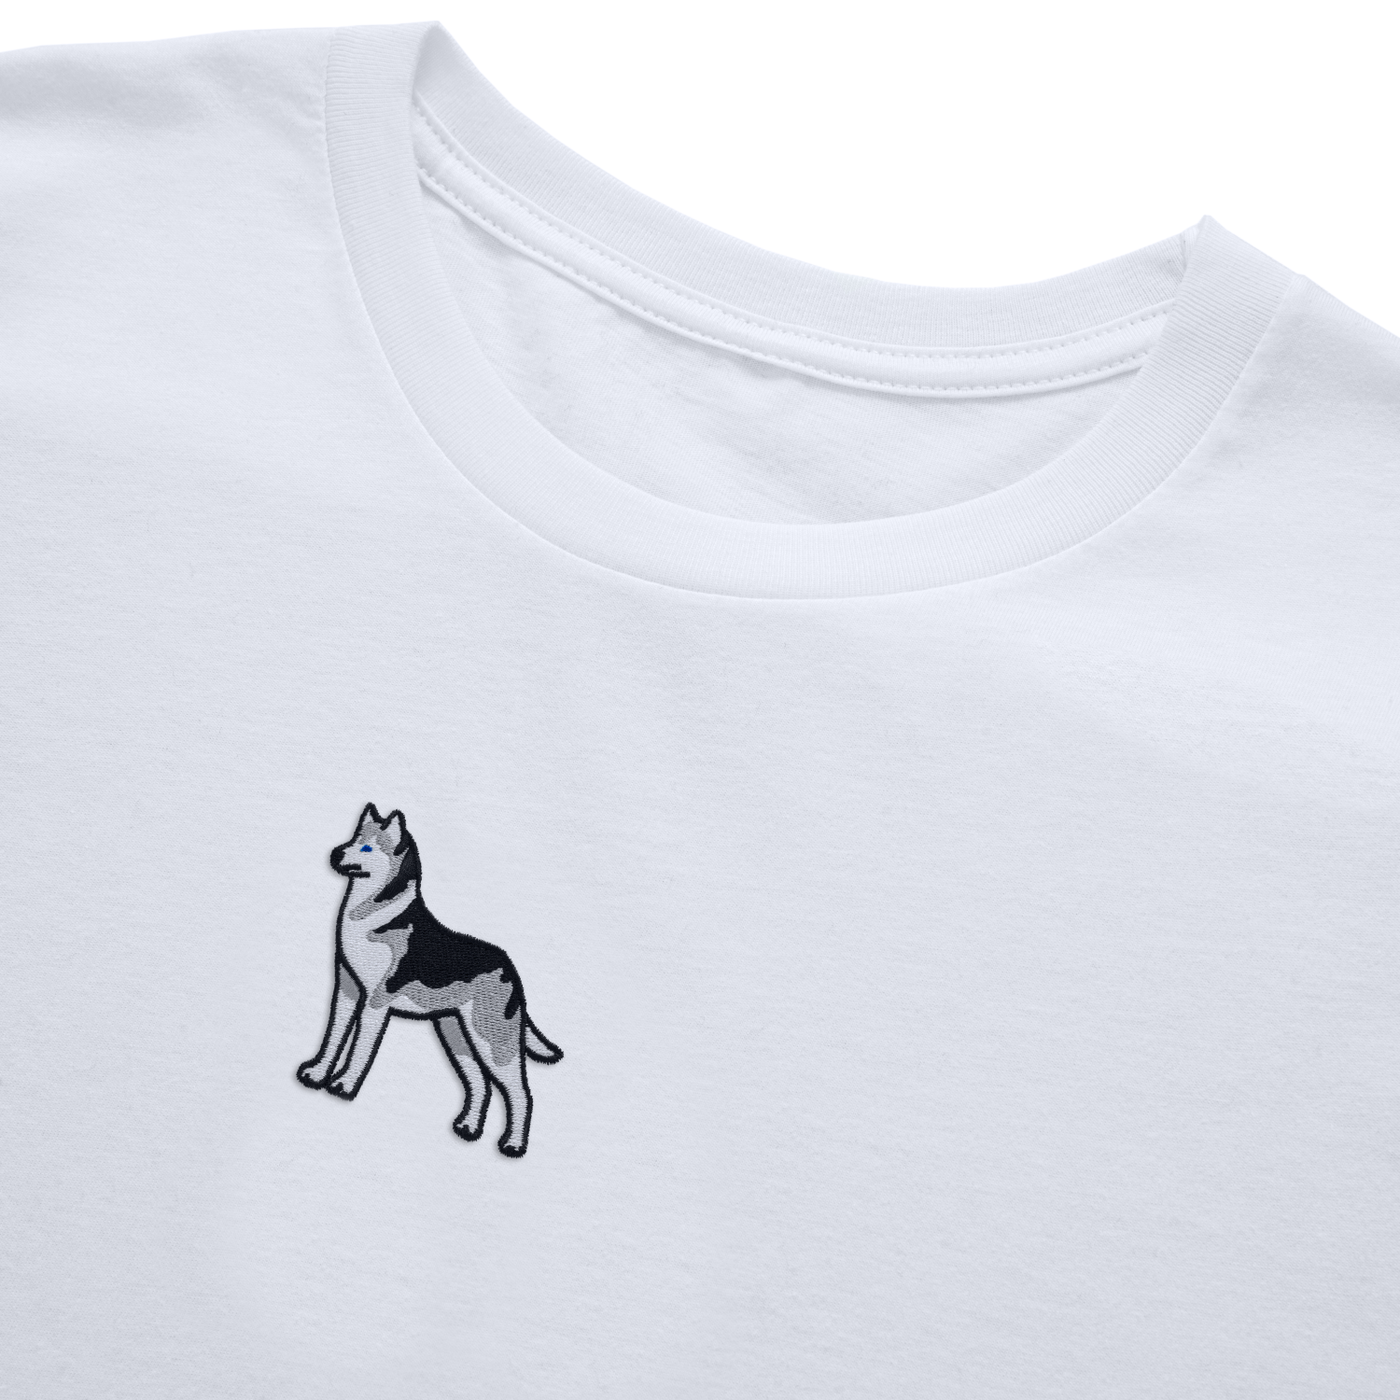 Bobby's Planet Men's Embroidered Siberian Husky Long Sleeve Shirt from Paws Dog Cat Animals Collection in White Color#color_white